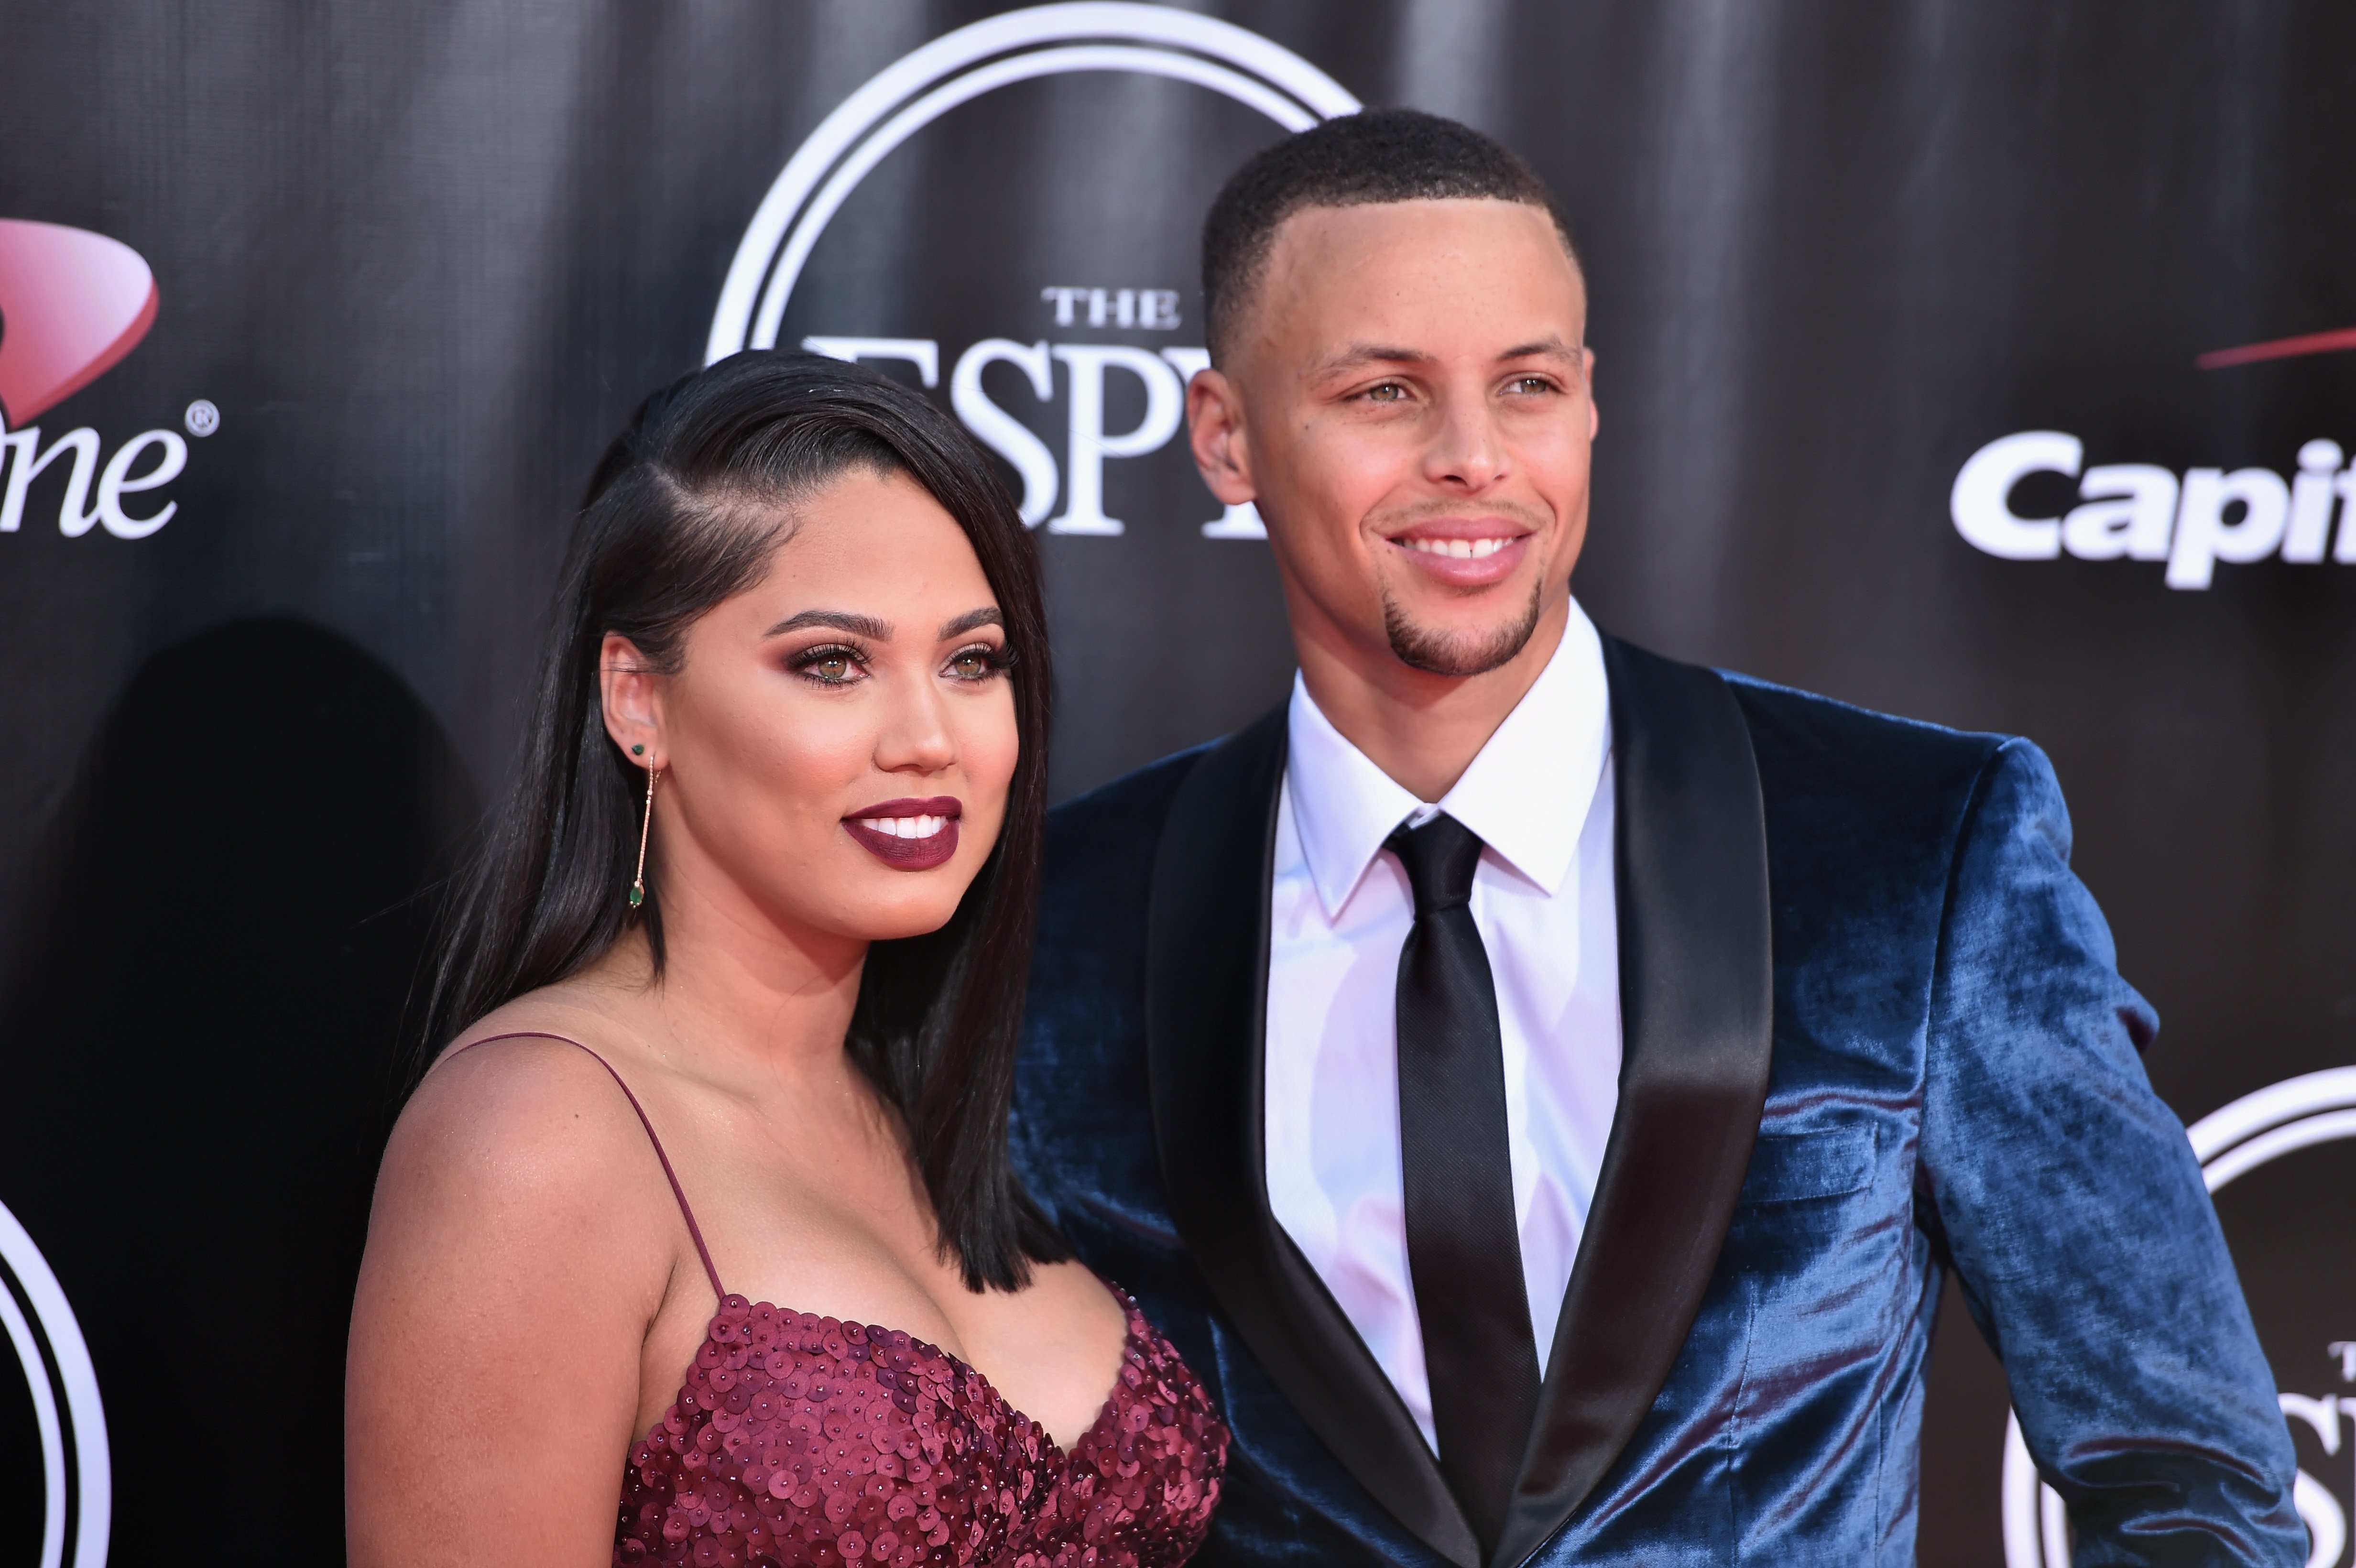 Stephen Curry and Ayesha Curry attend the 2016 ESPYS on July 13, 2016 | Photo: Getty Images